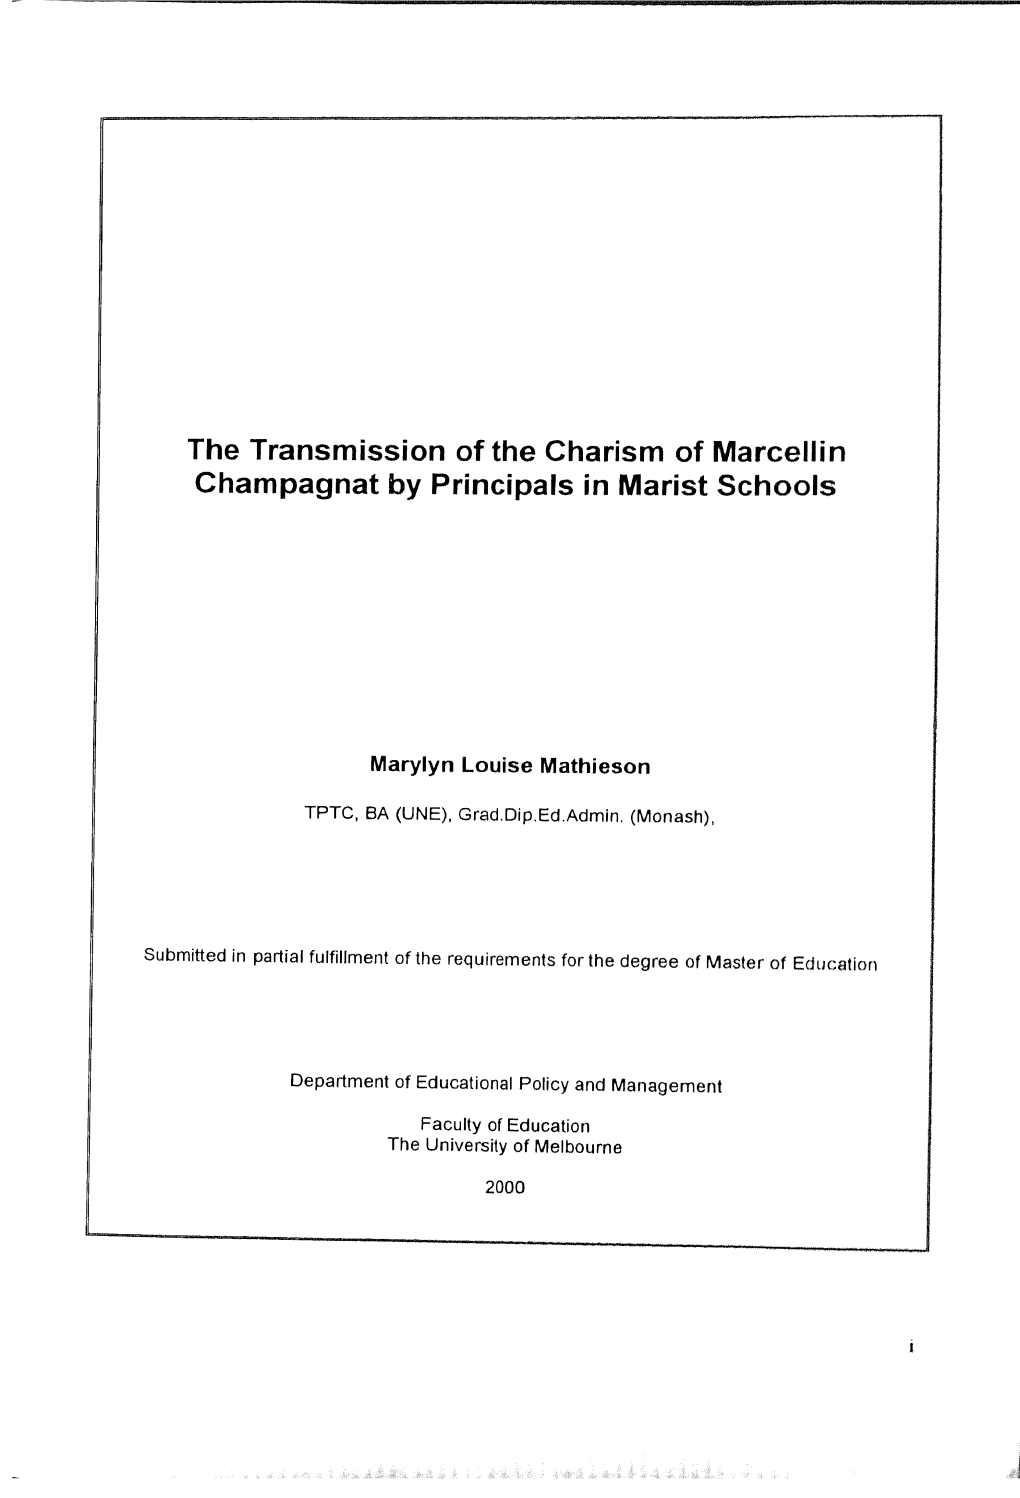 The Transmission of the Charism of Marcellin Champagnat by Principals in Marist Schools